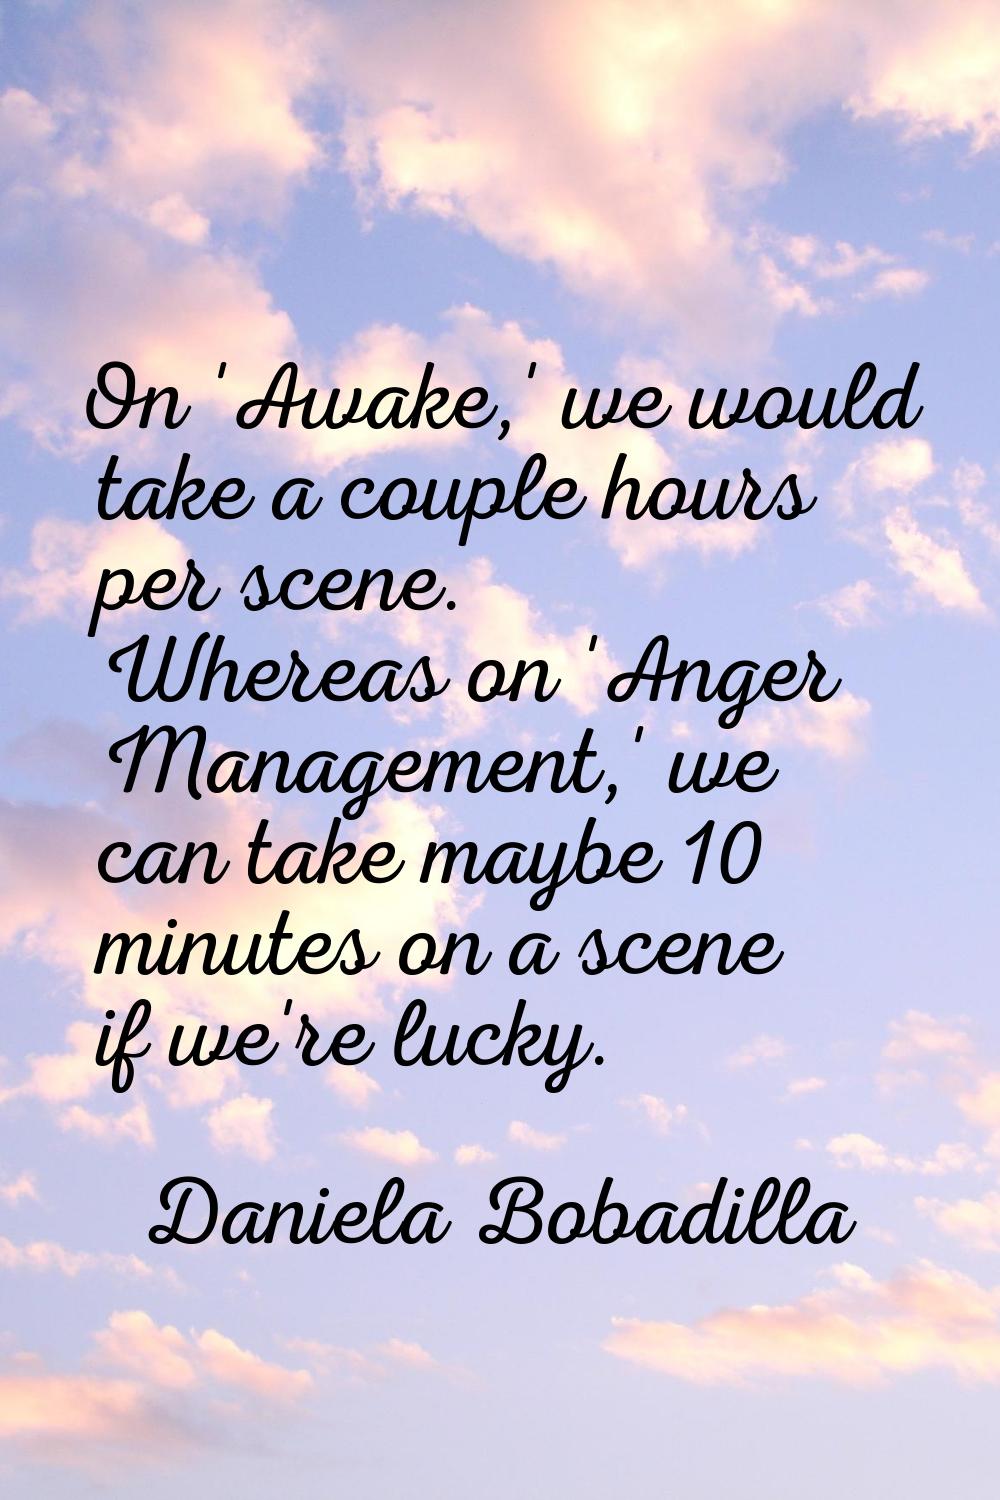 On 'Awake,' we would take a couple hours per scene. Whereas on 'Anger Management,' we can take mayb